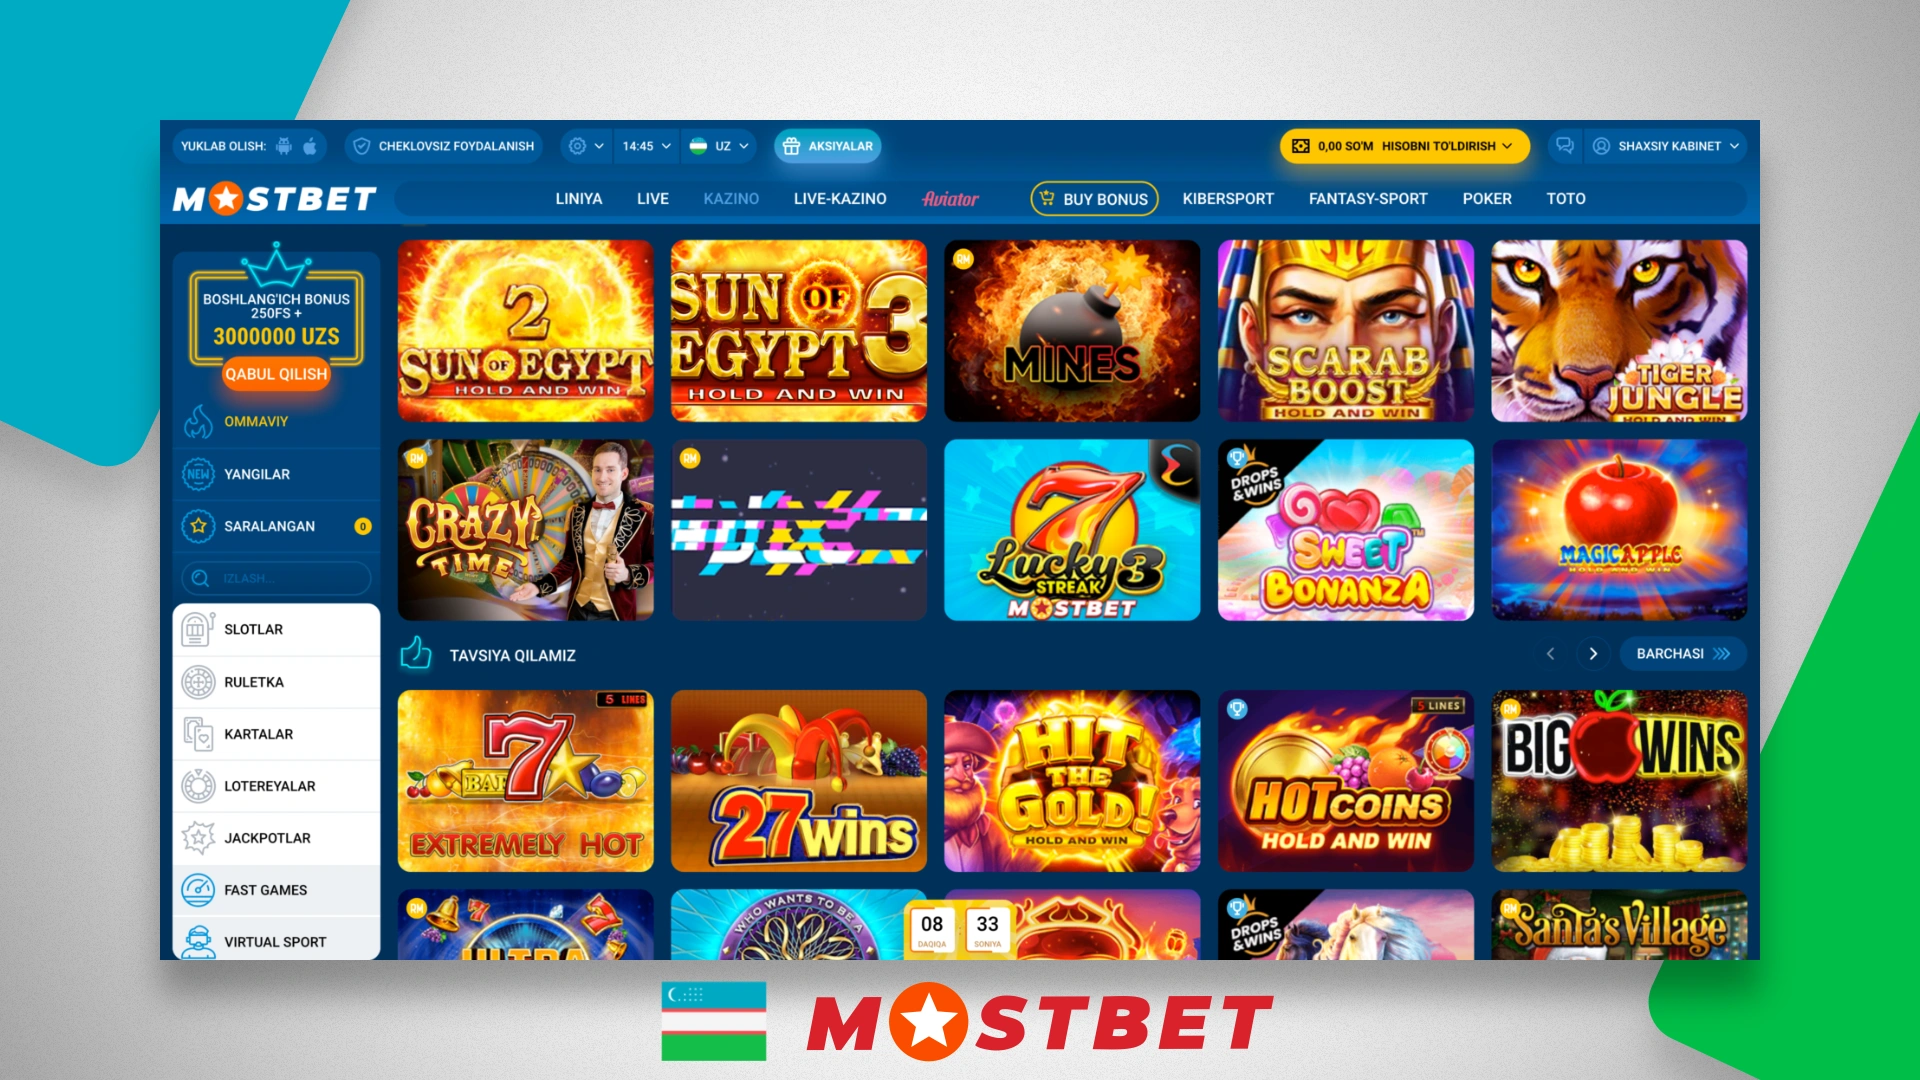 A separate section Online casinos on the site Mostbet UZ